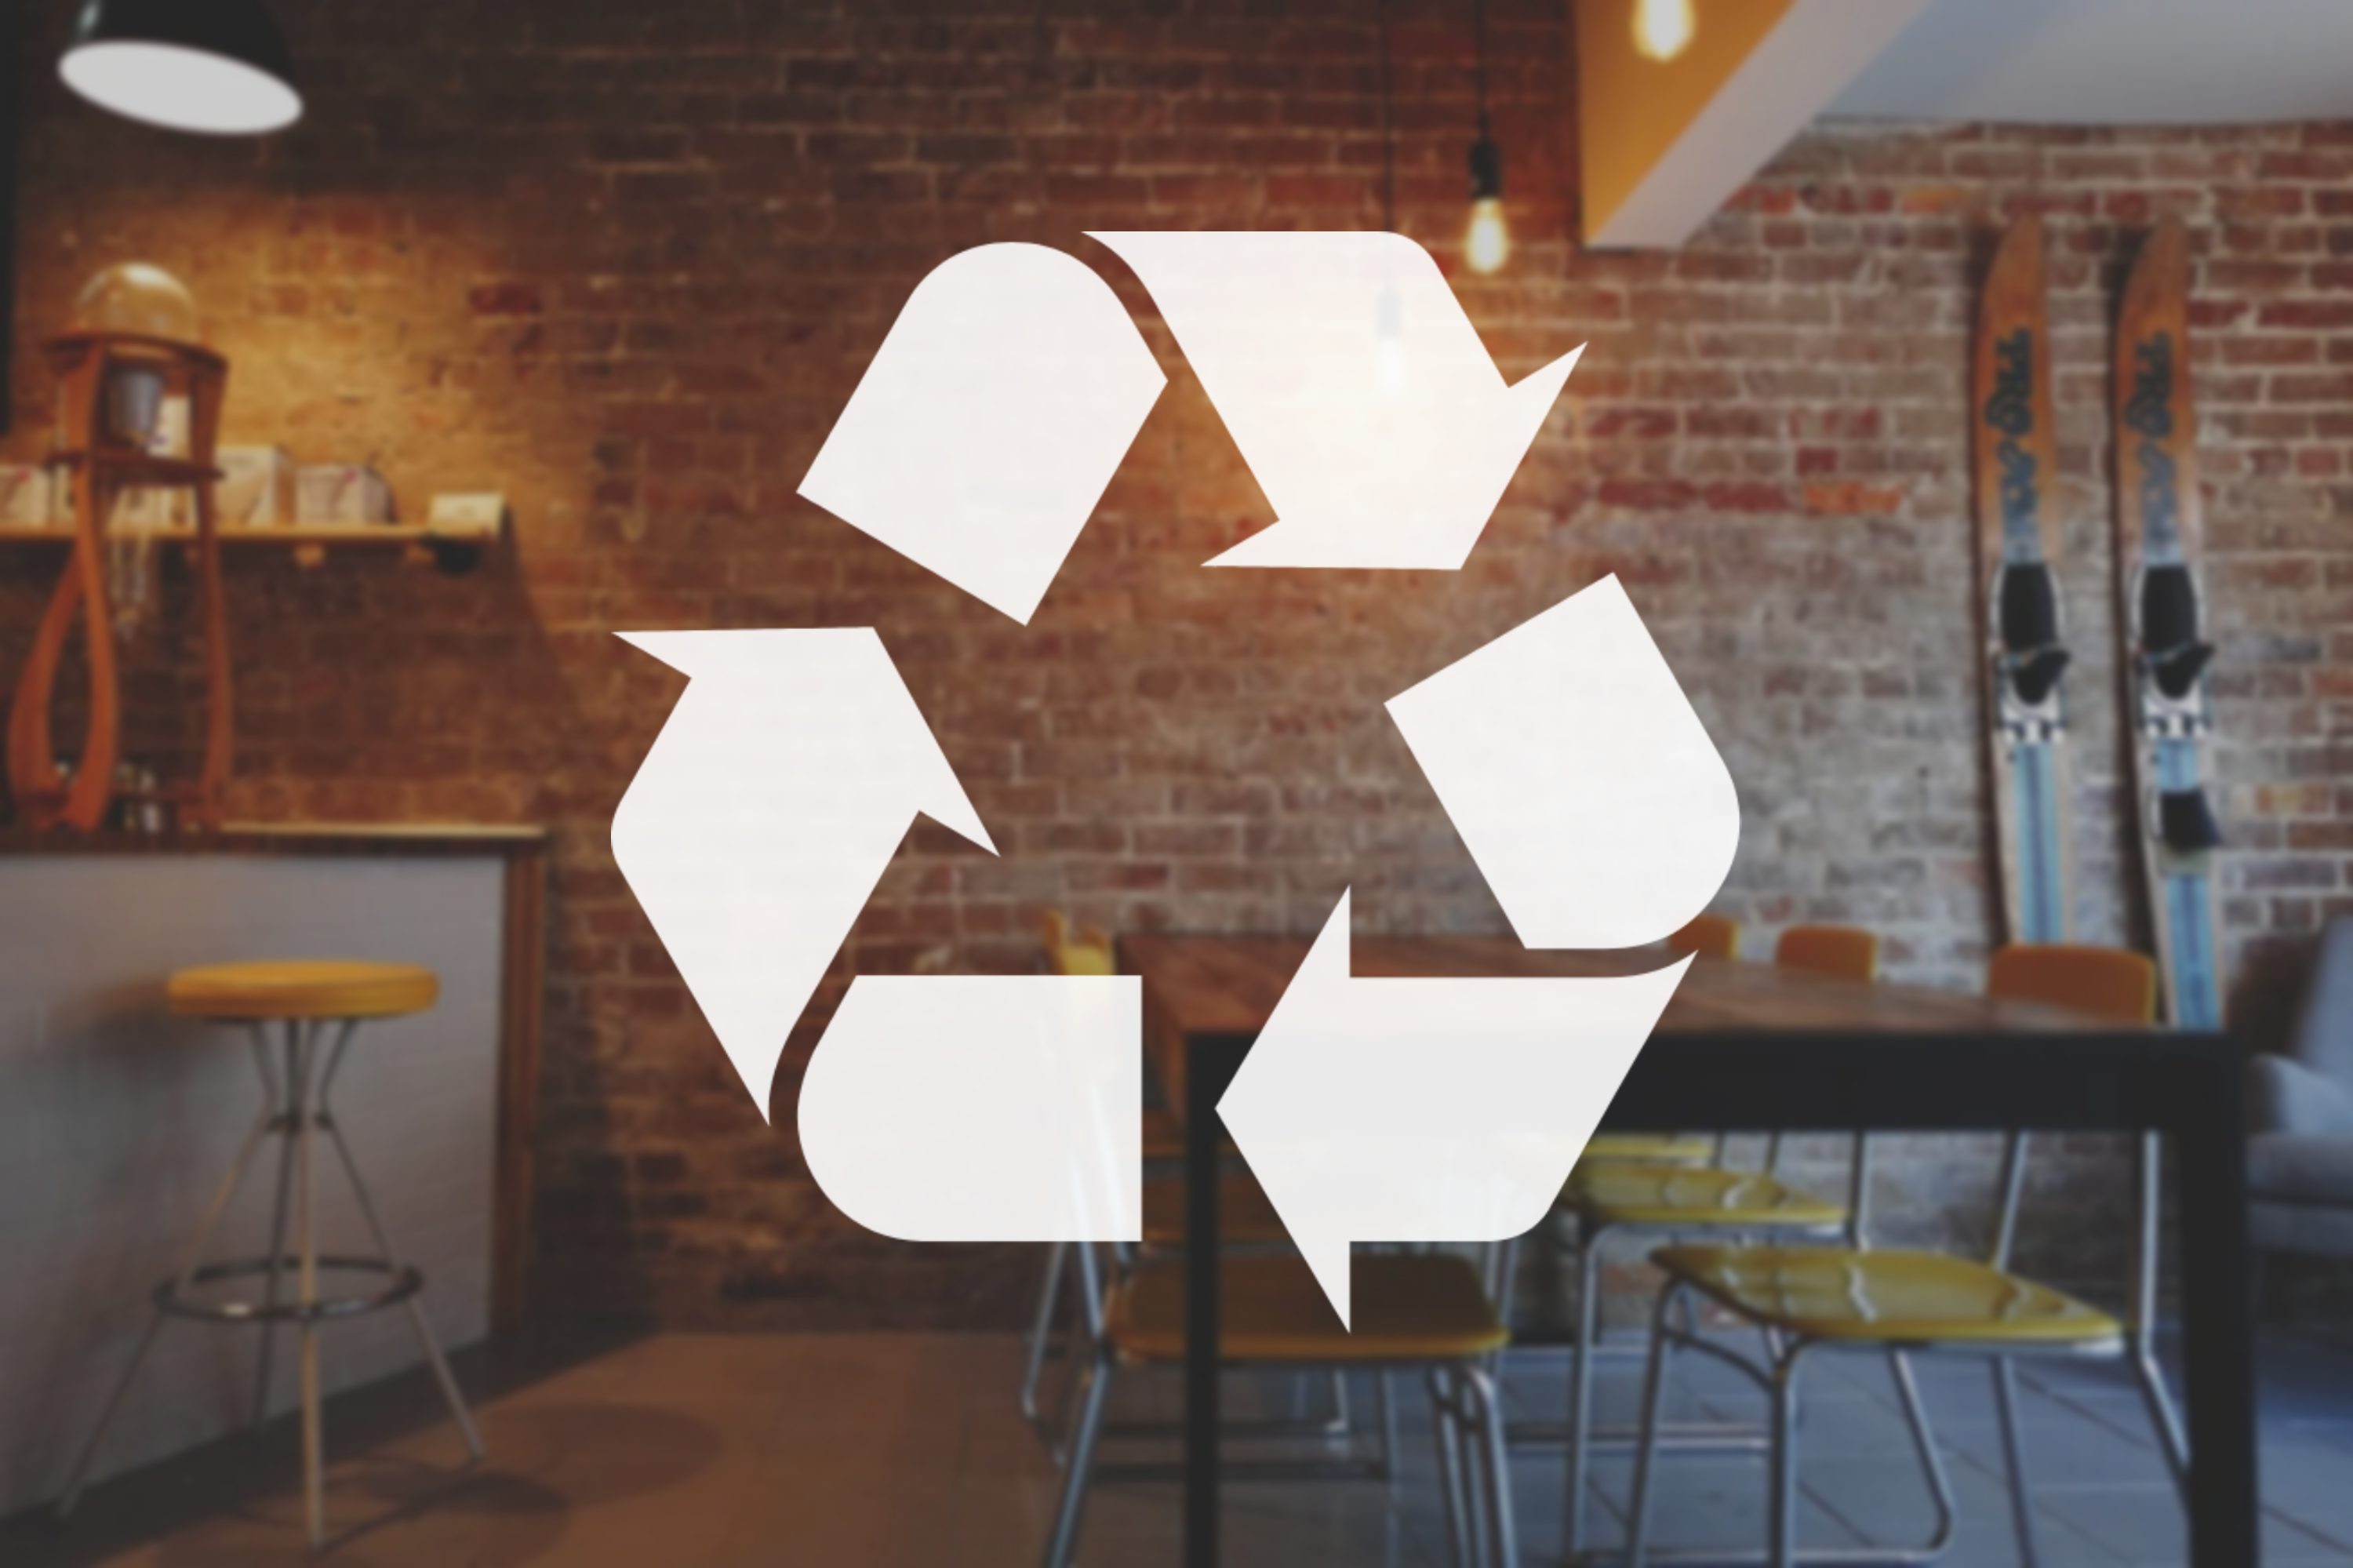 Recycling Symbol Decal - Vinyl Sticker for Businesses, Stores, Bars, Coffee Shops, Eatery, Cafeteria, Food Truck!